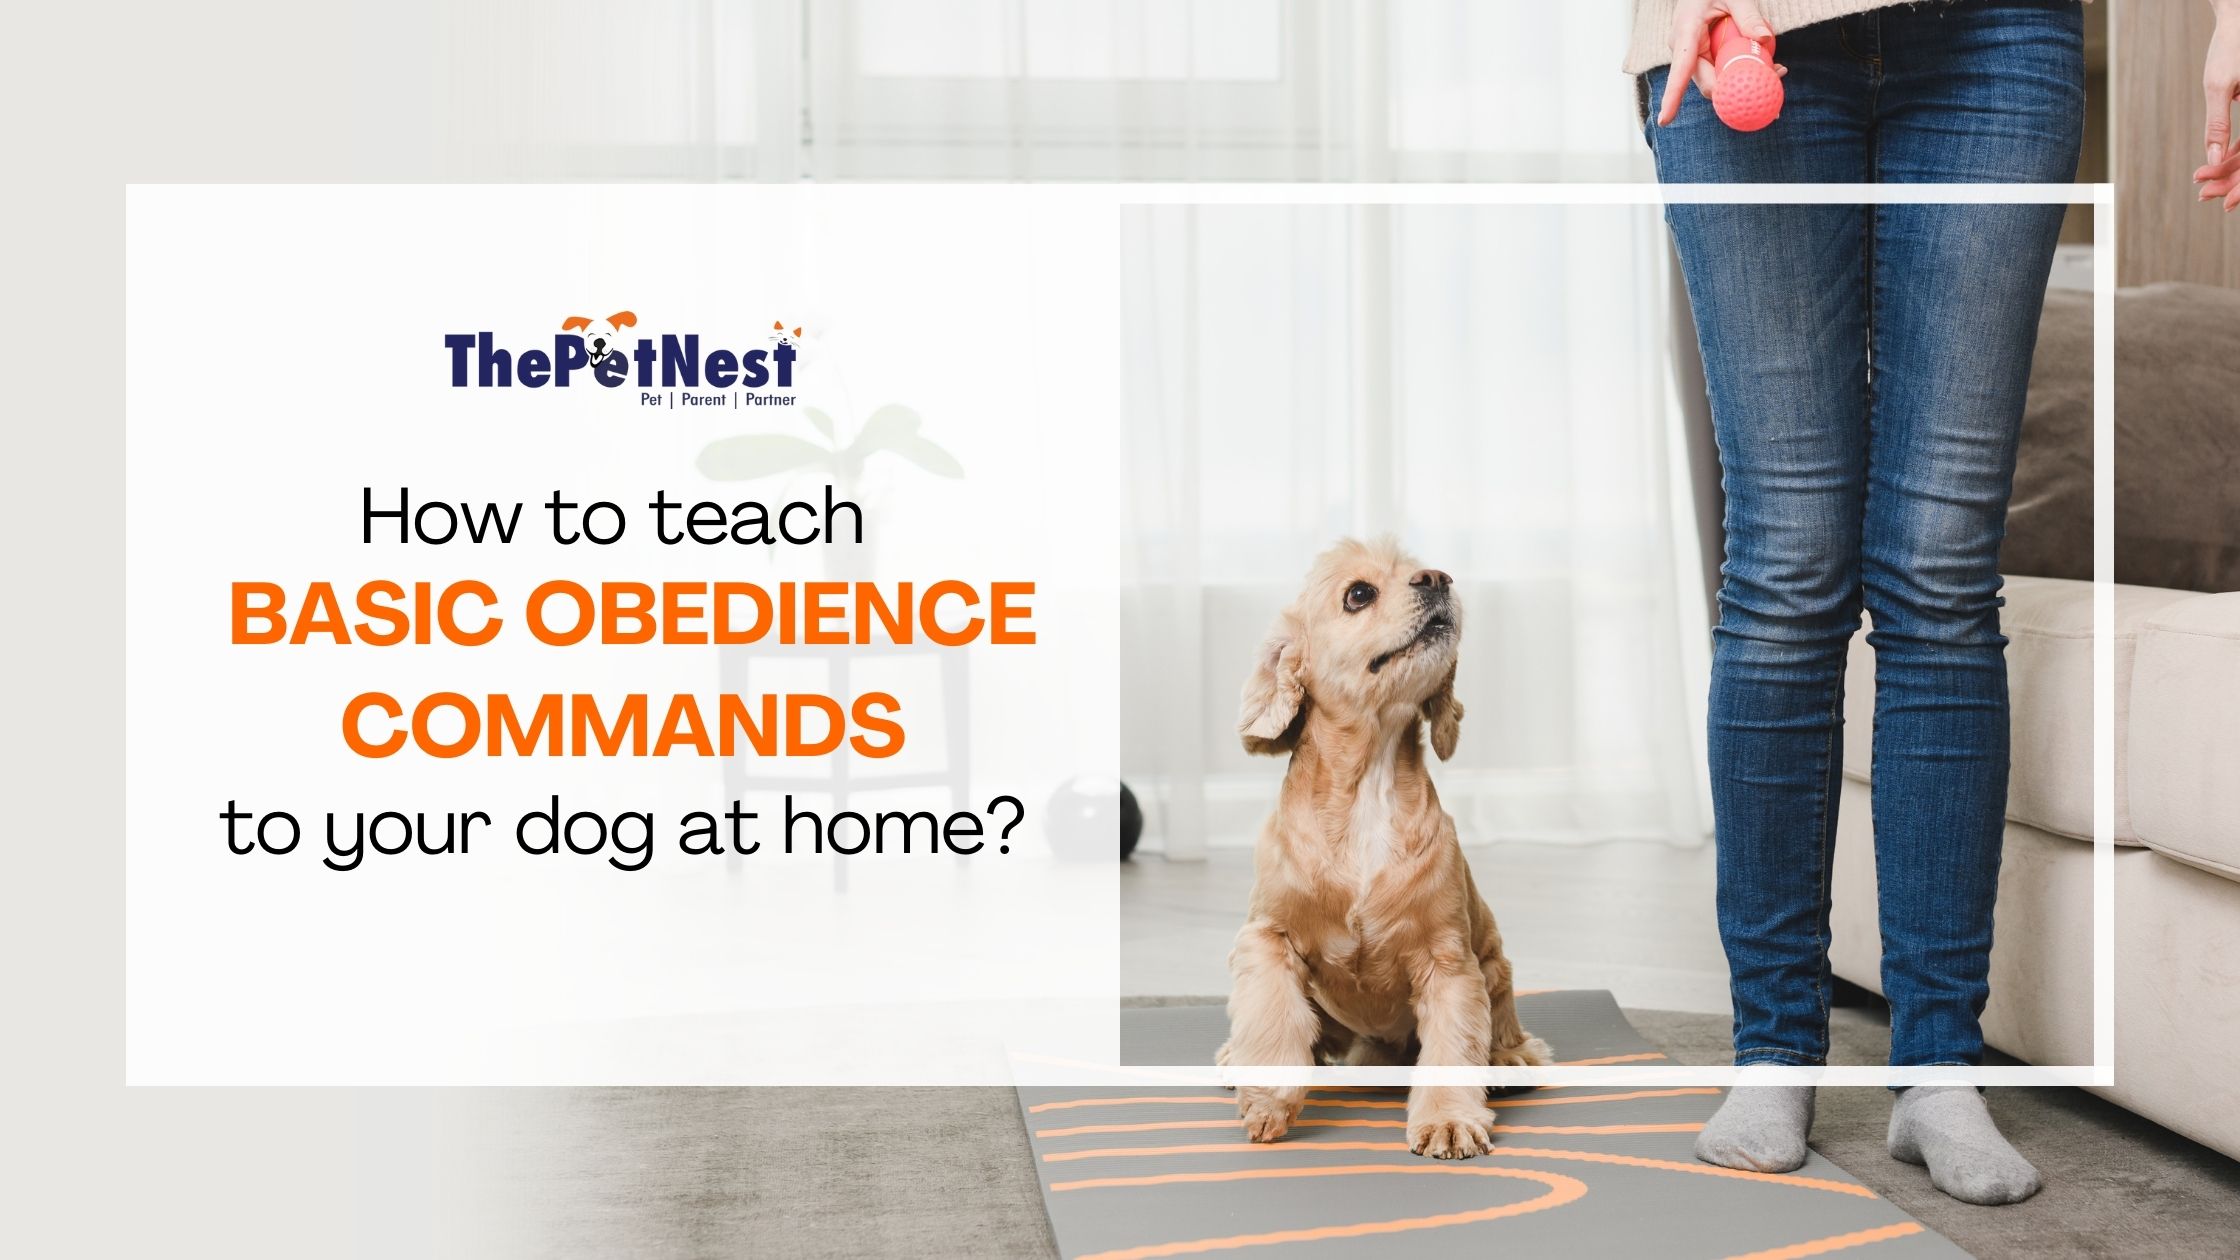 How to teach basic obedience commands to your dog at home?